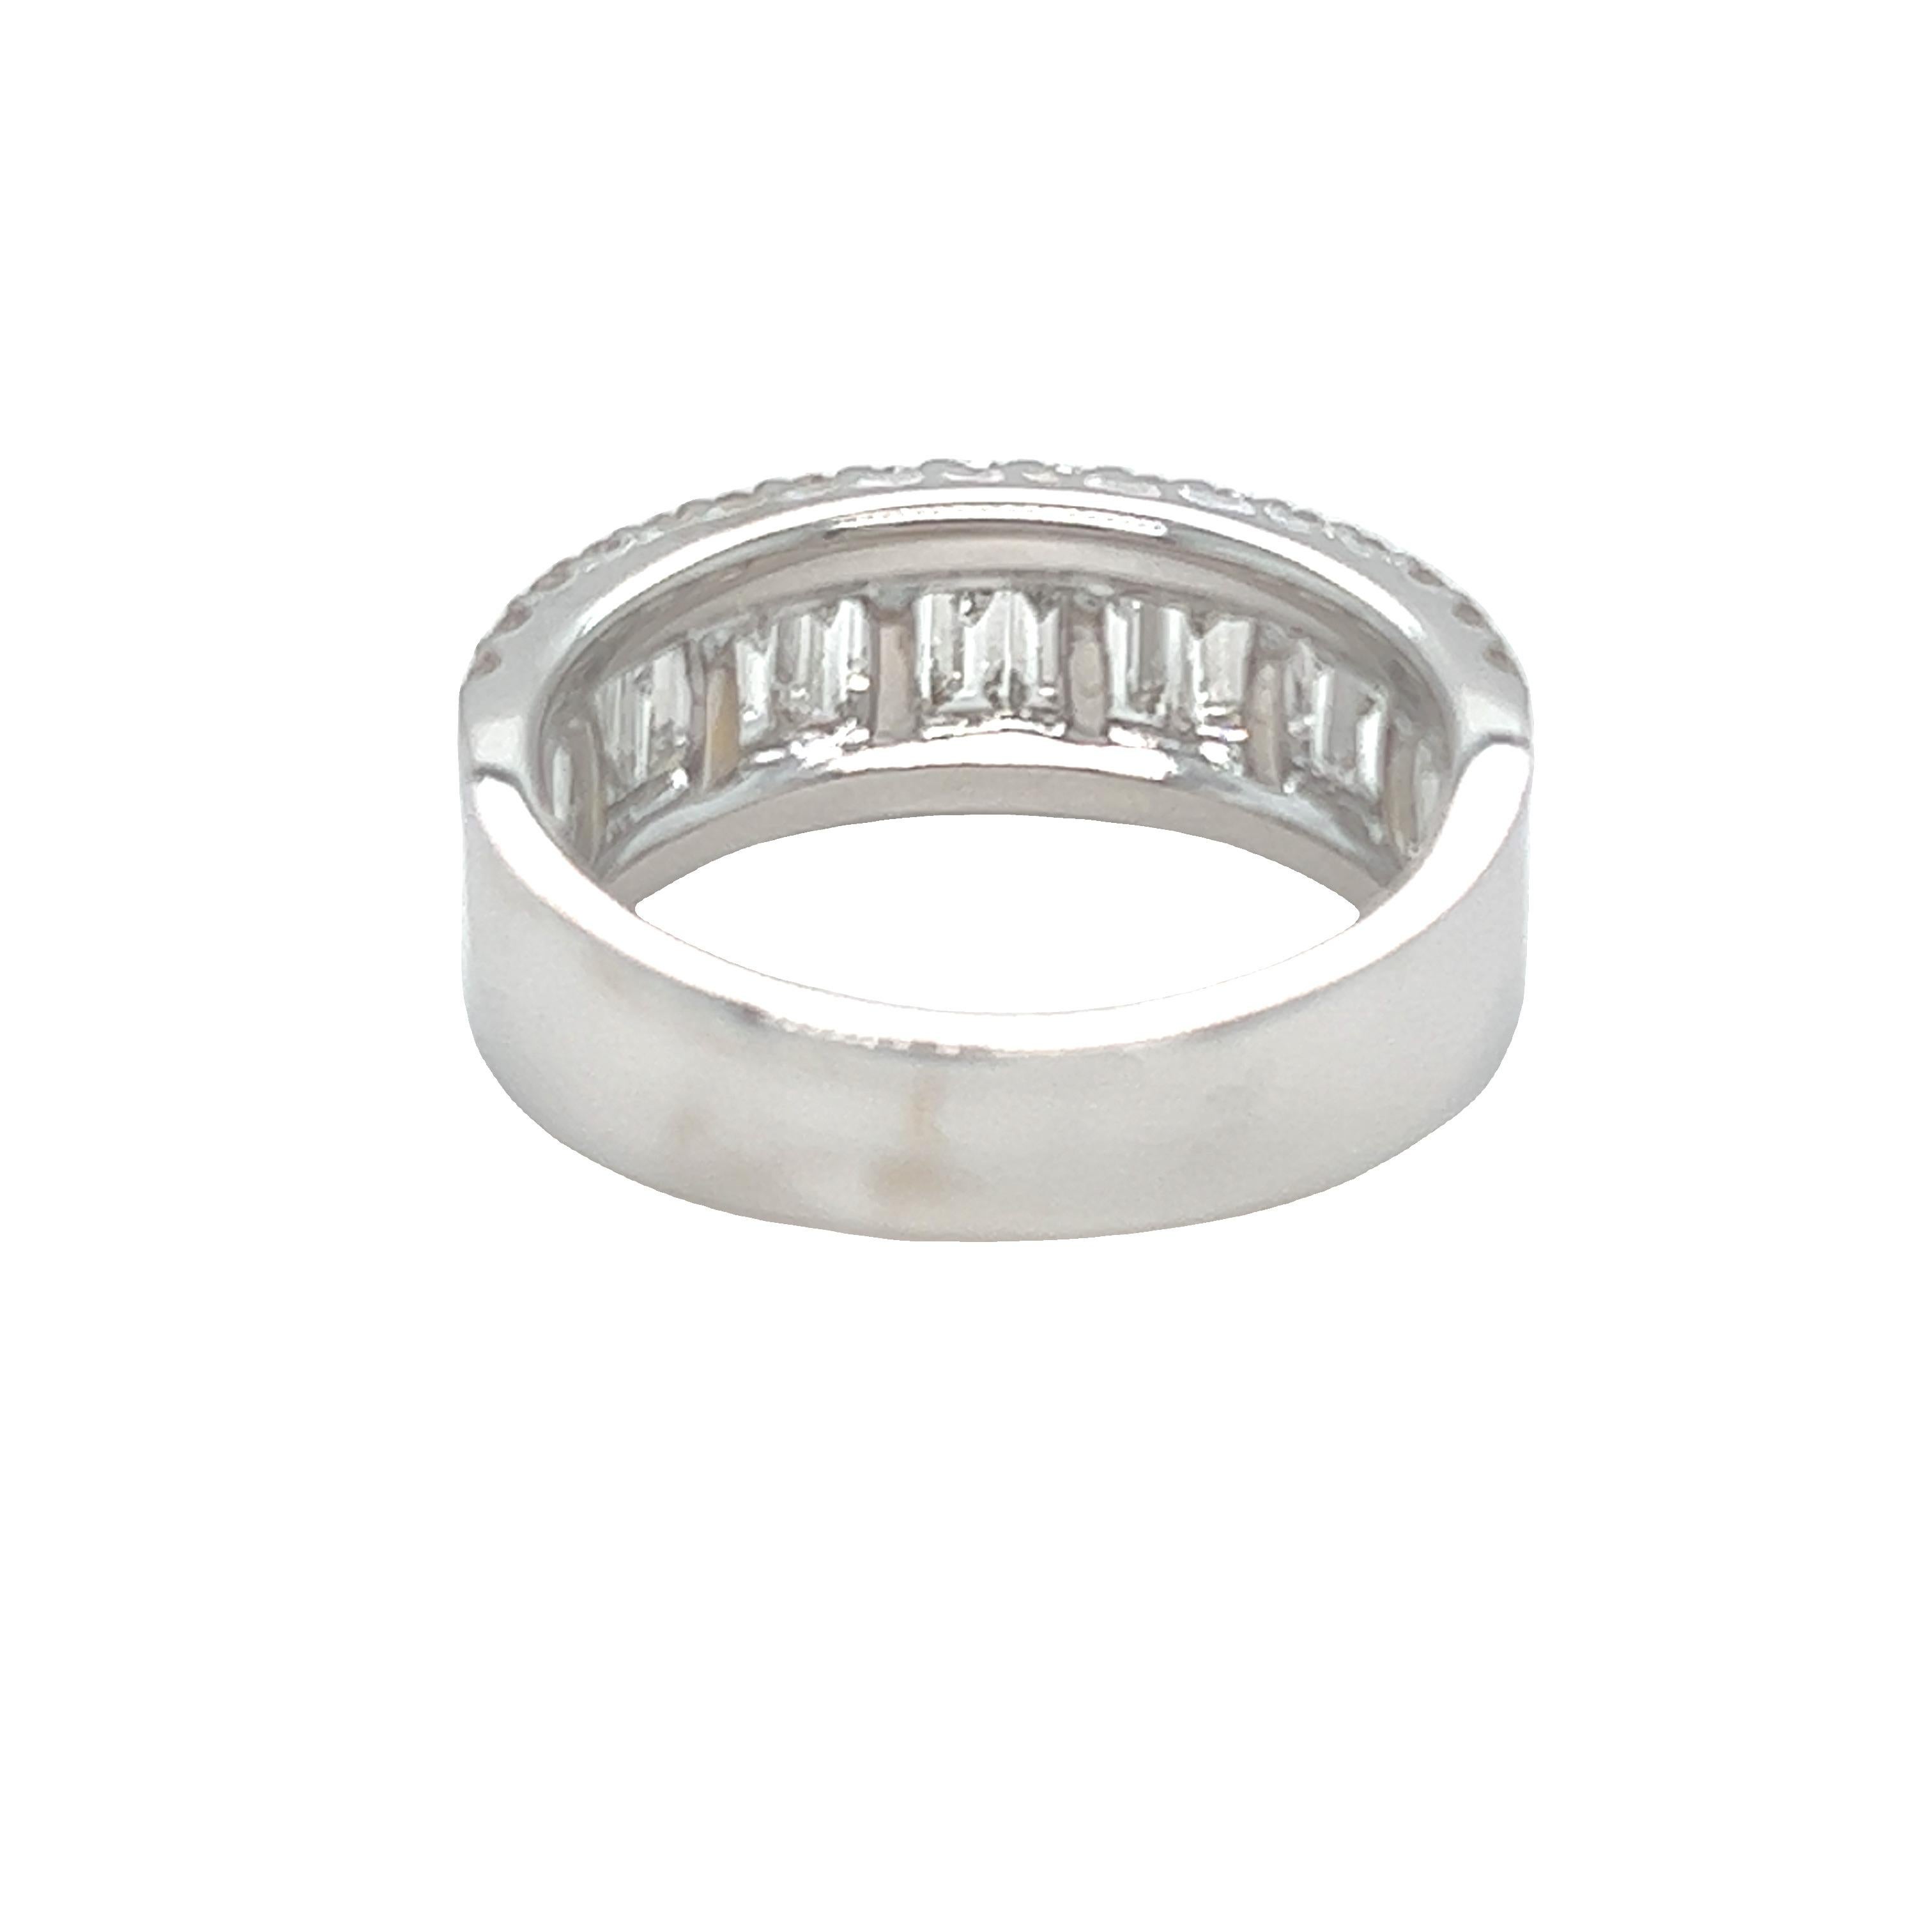 2 carat Baguette and Round Diamond Half Eternity Band Ring 14K White Gold In Excellent Condition For Sale In beverly hills, CA